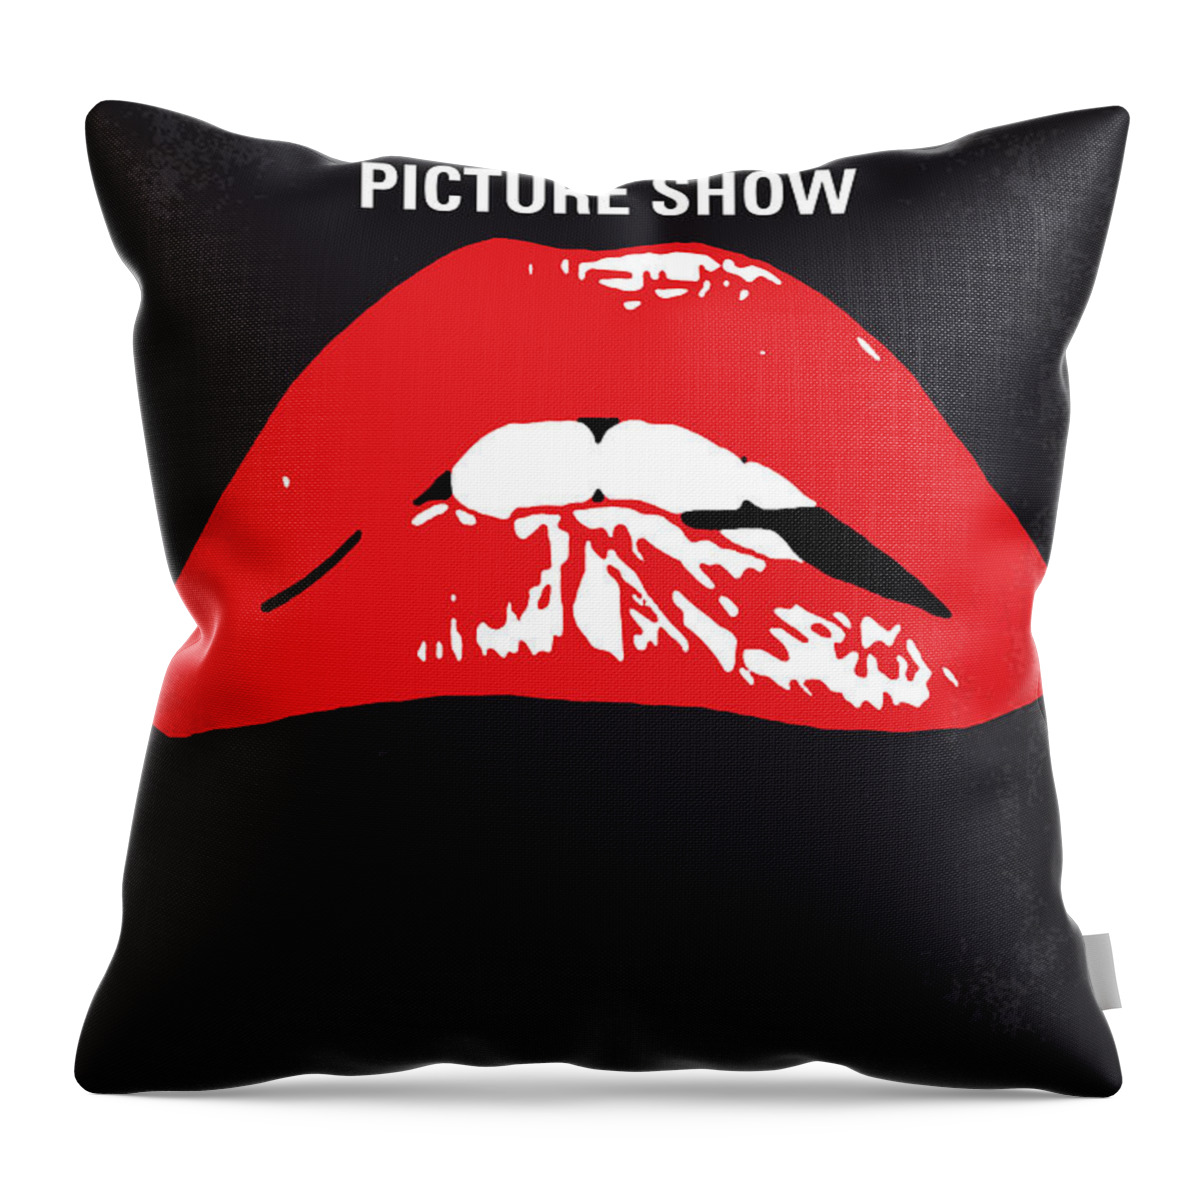 The Rocky Horror Picture Show Throw Pillow featuring the digital art No153 My The Rocky Horror Picture Show minimal movie poster by Chungkong Art